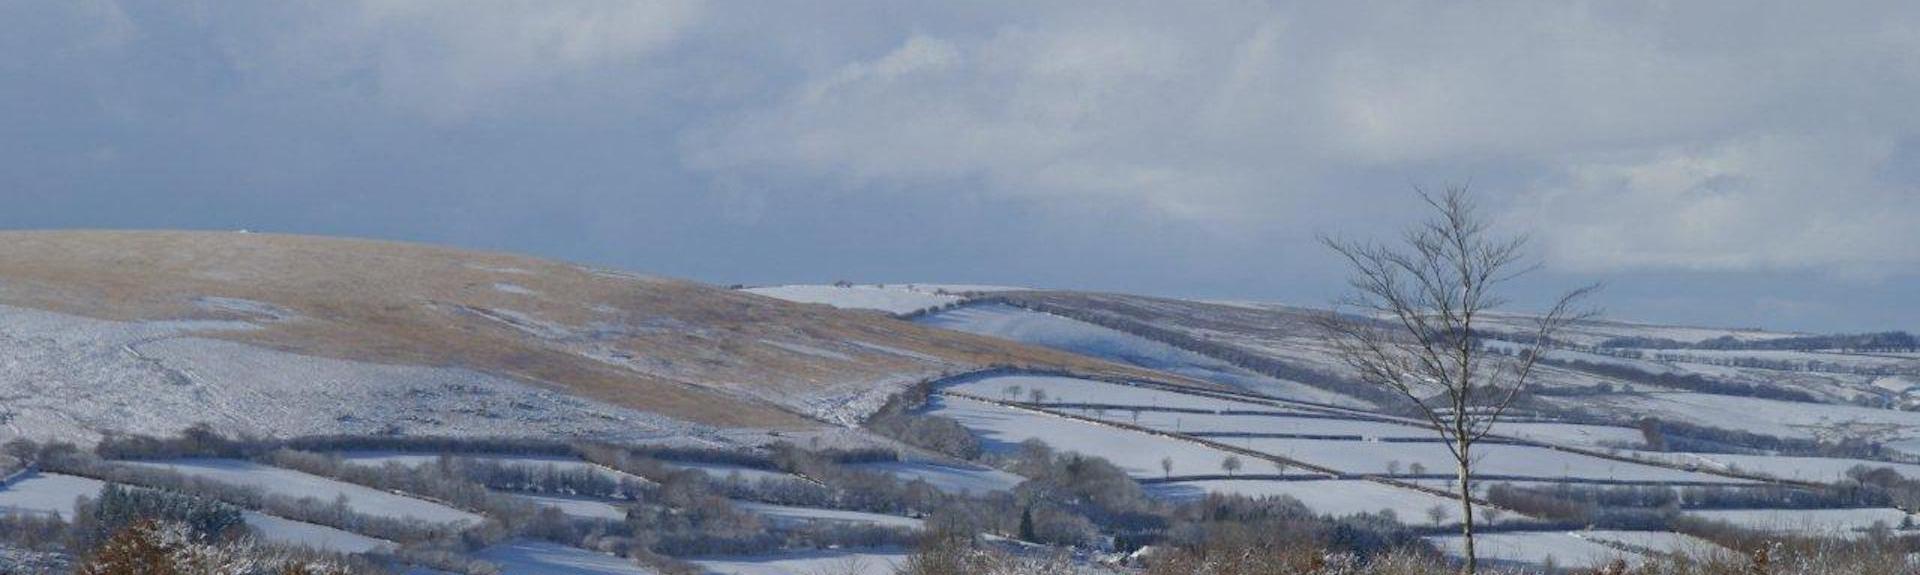 A winter view of a snow-covered Exmoor landscape which lies beneath dark, snow-laden clouds